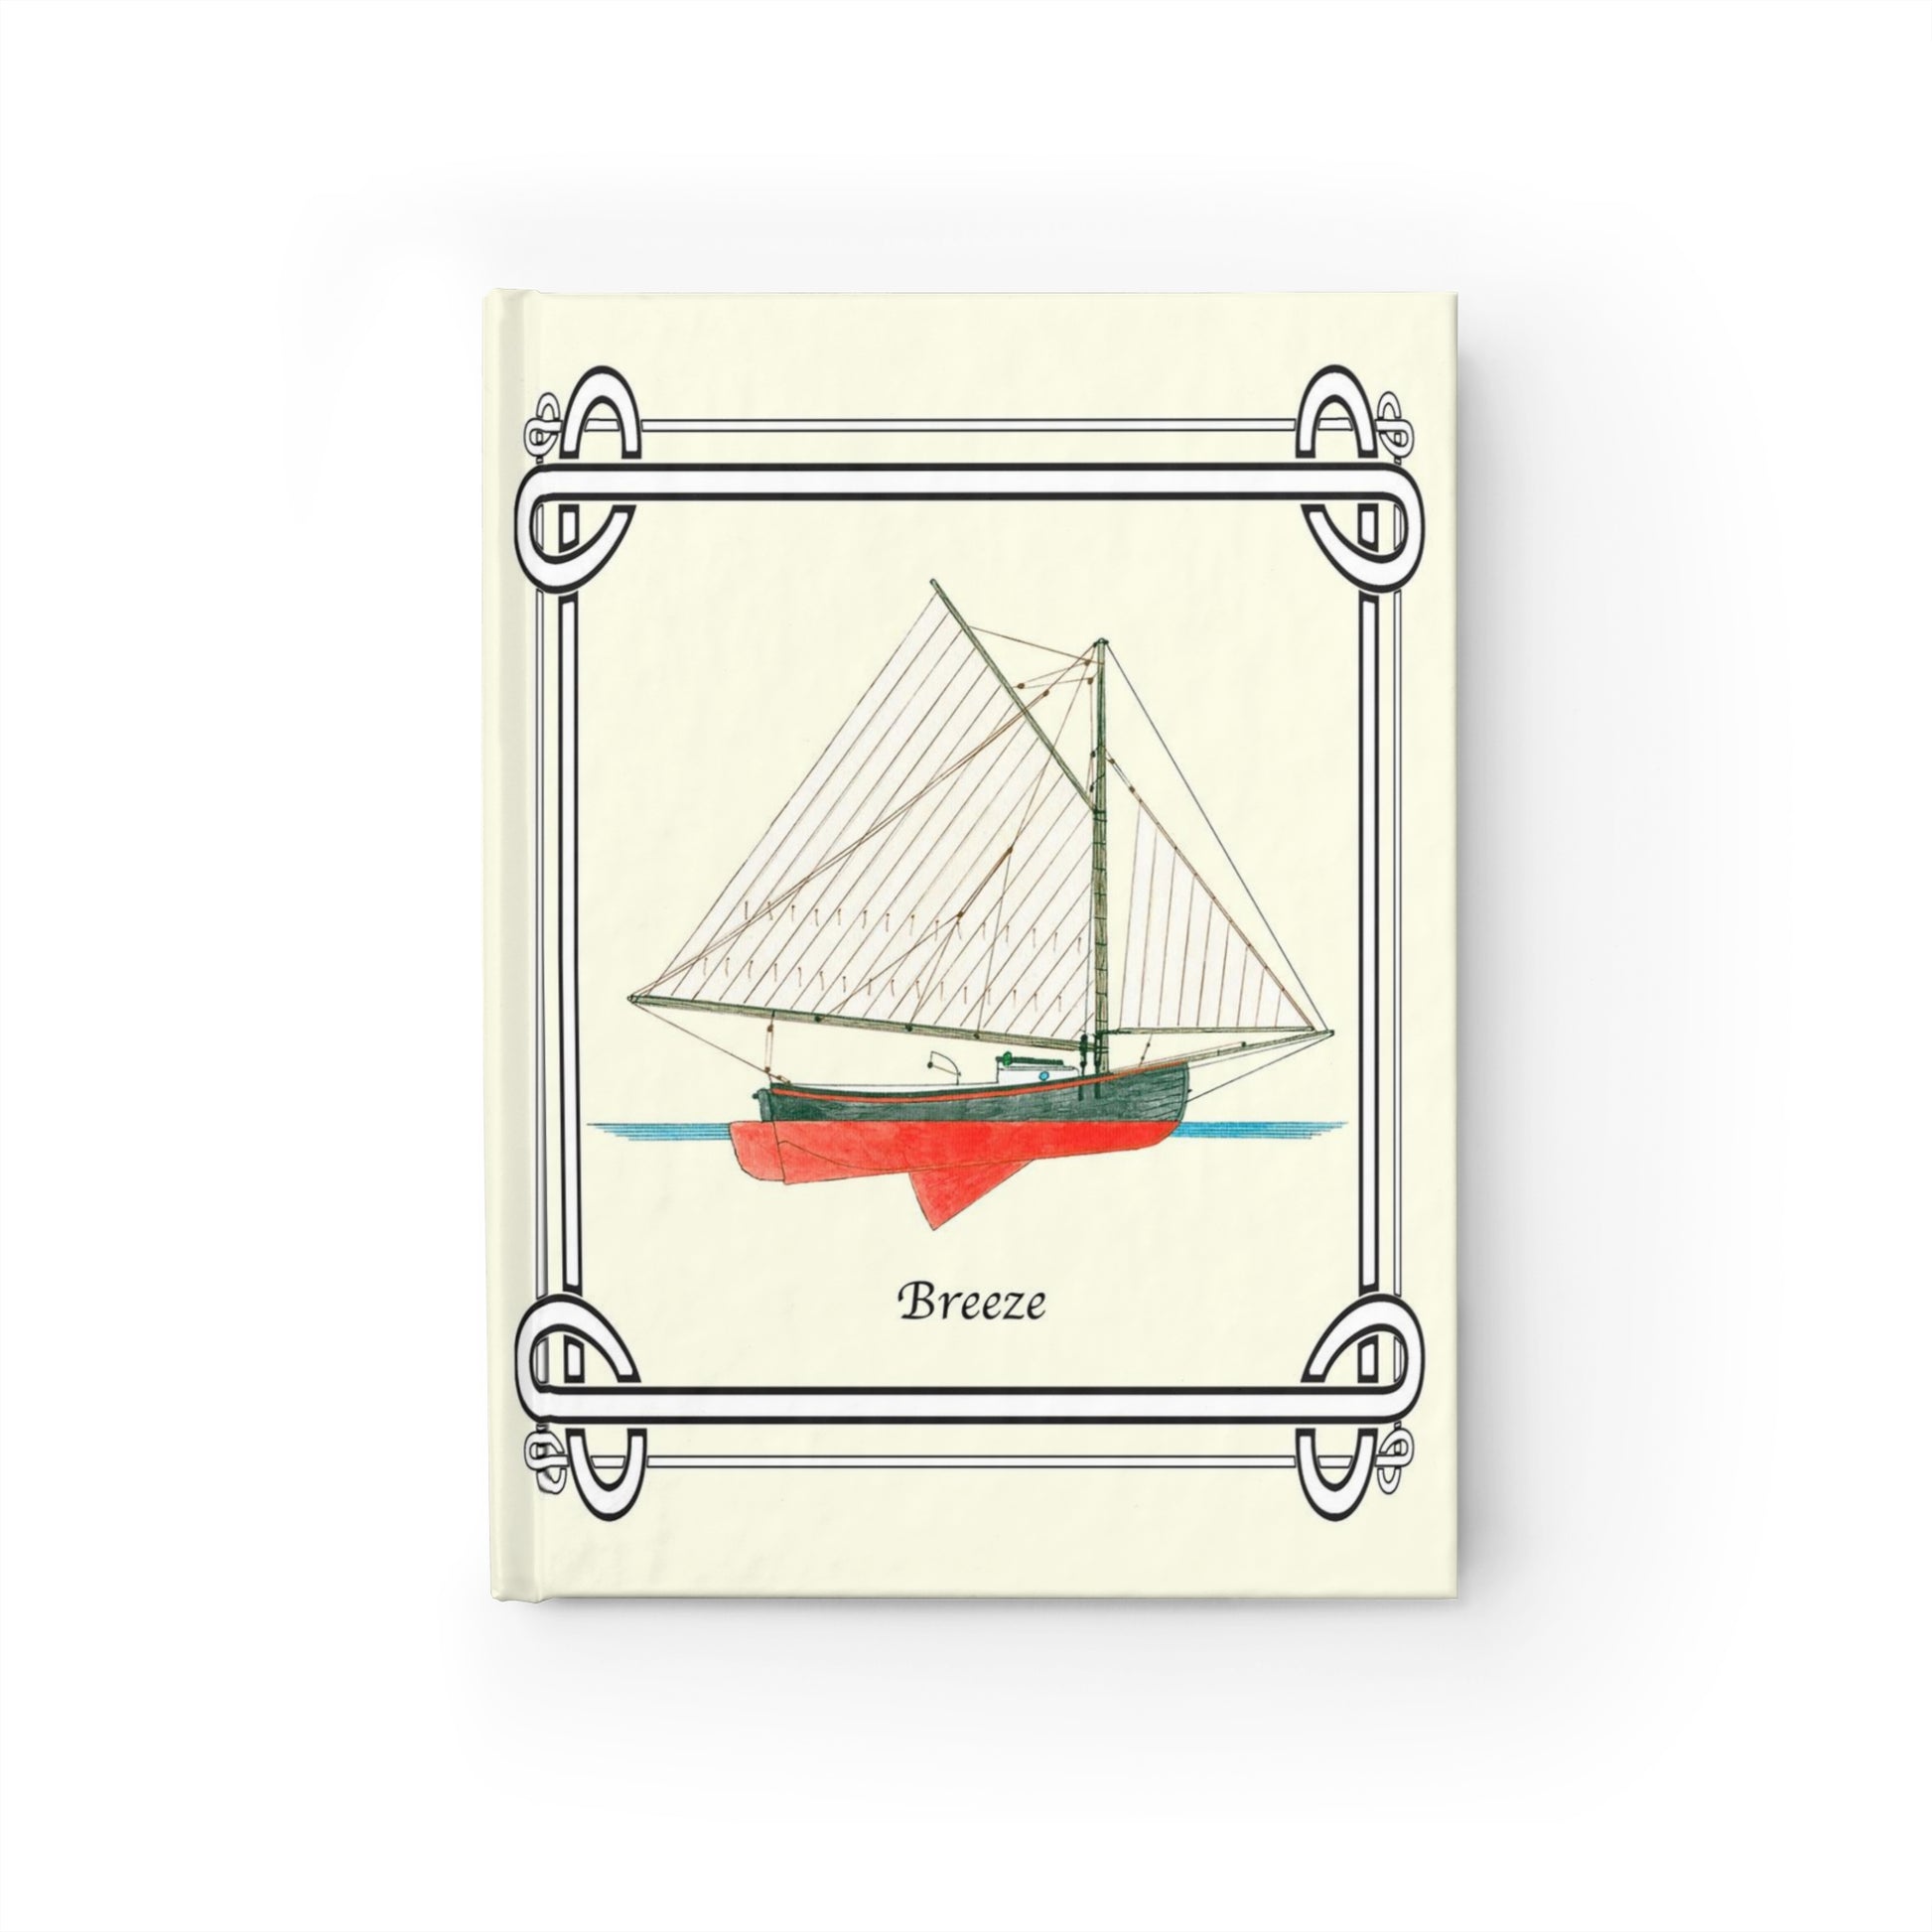 Breeze was a Noank Fishing Sloop. This journal is a perfect gift for a sailing friend.